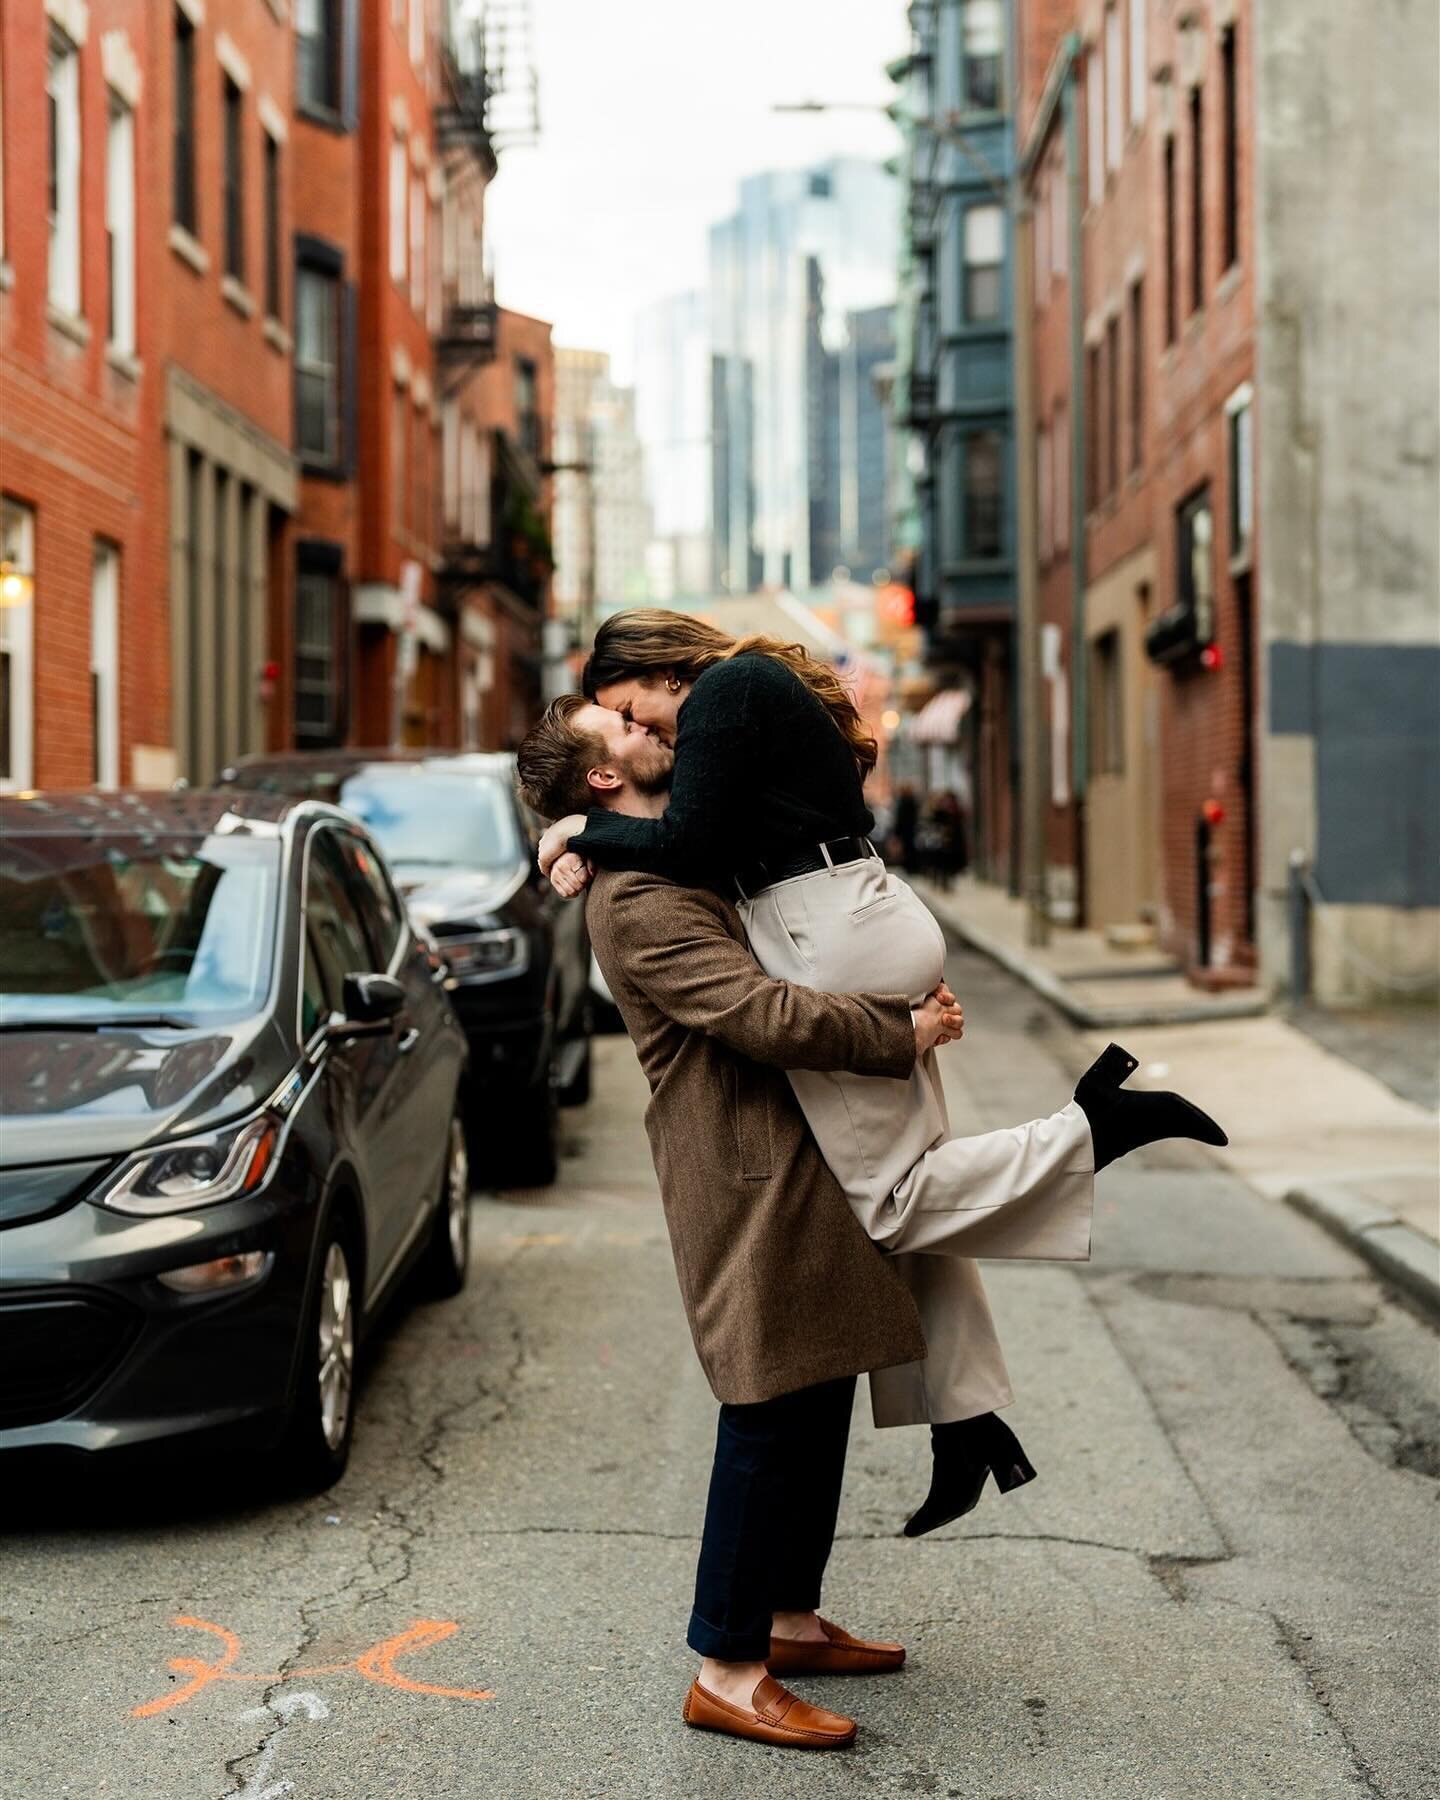 Starting off engagement season with Mikaila &amp; Matthew in the enchanting North End of Boston! It was our first time discovering this romantic corner of the city, and it stole our hearts. From the delicious food to the cozy cobblestone streets and 